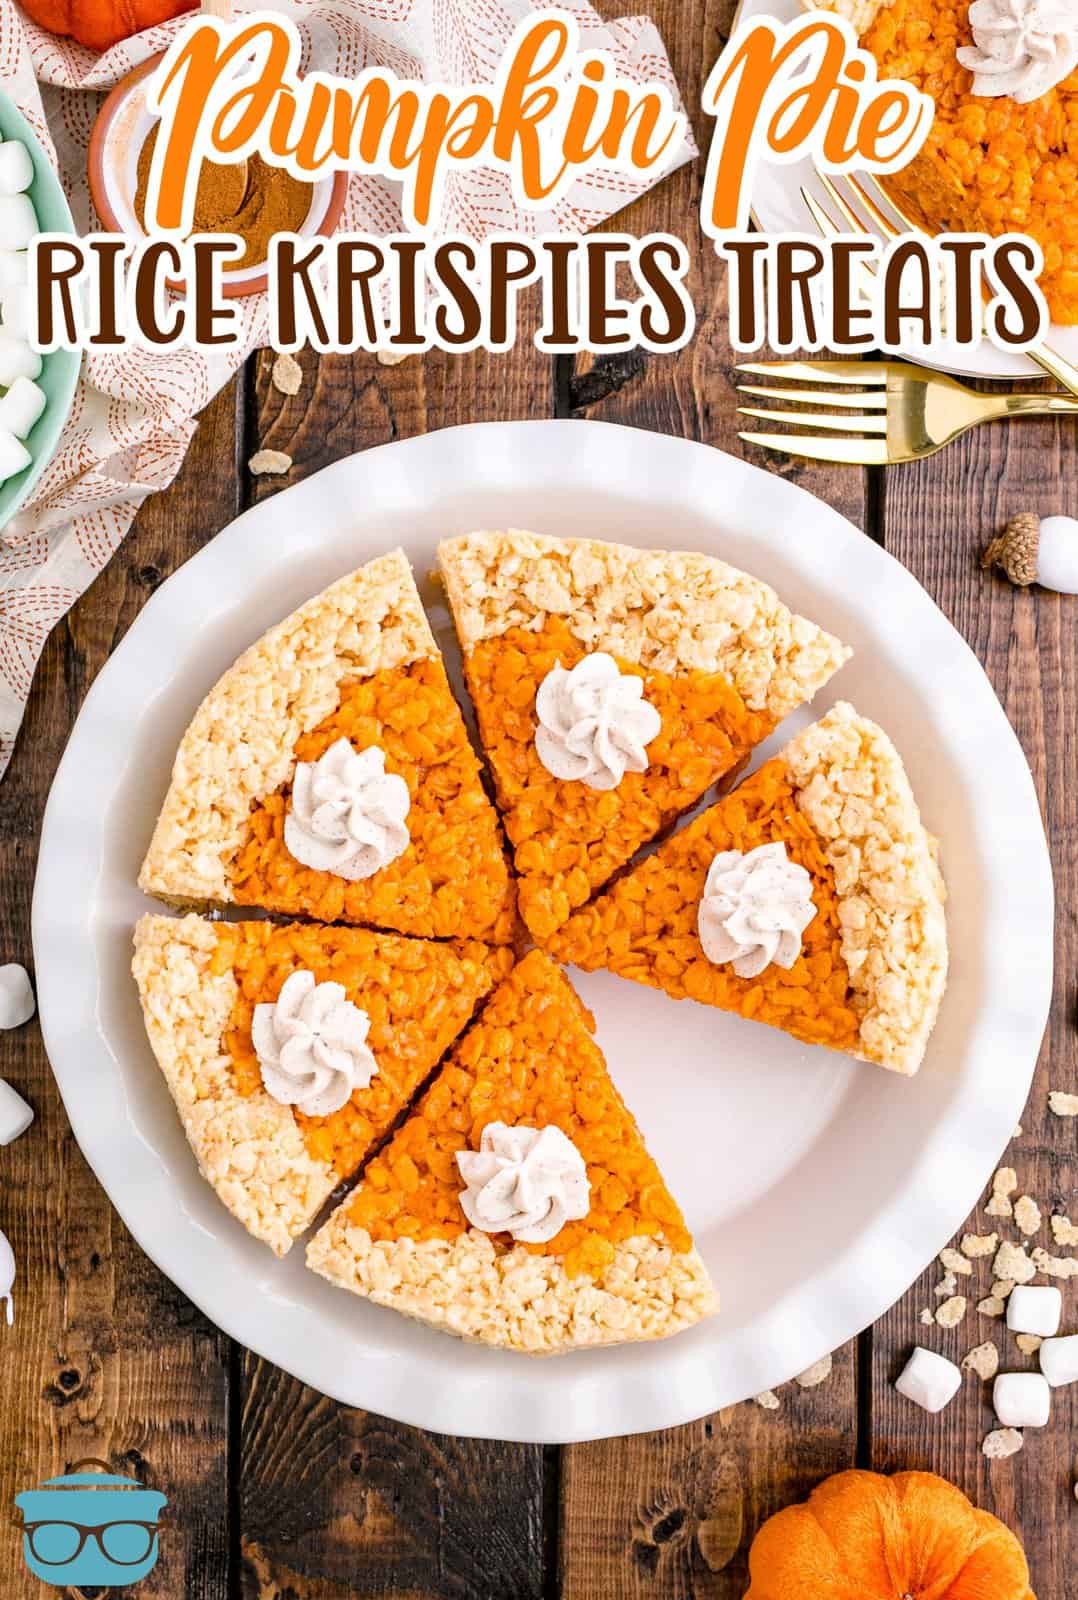 Overhead of Pumpkin Pie Rice Krispies Treats in pie plate with slices missing topped with cinnamon whipped cream Pinterest image.